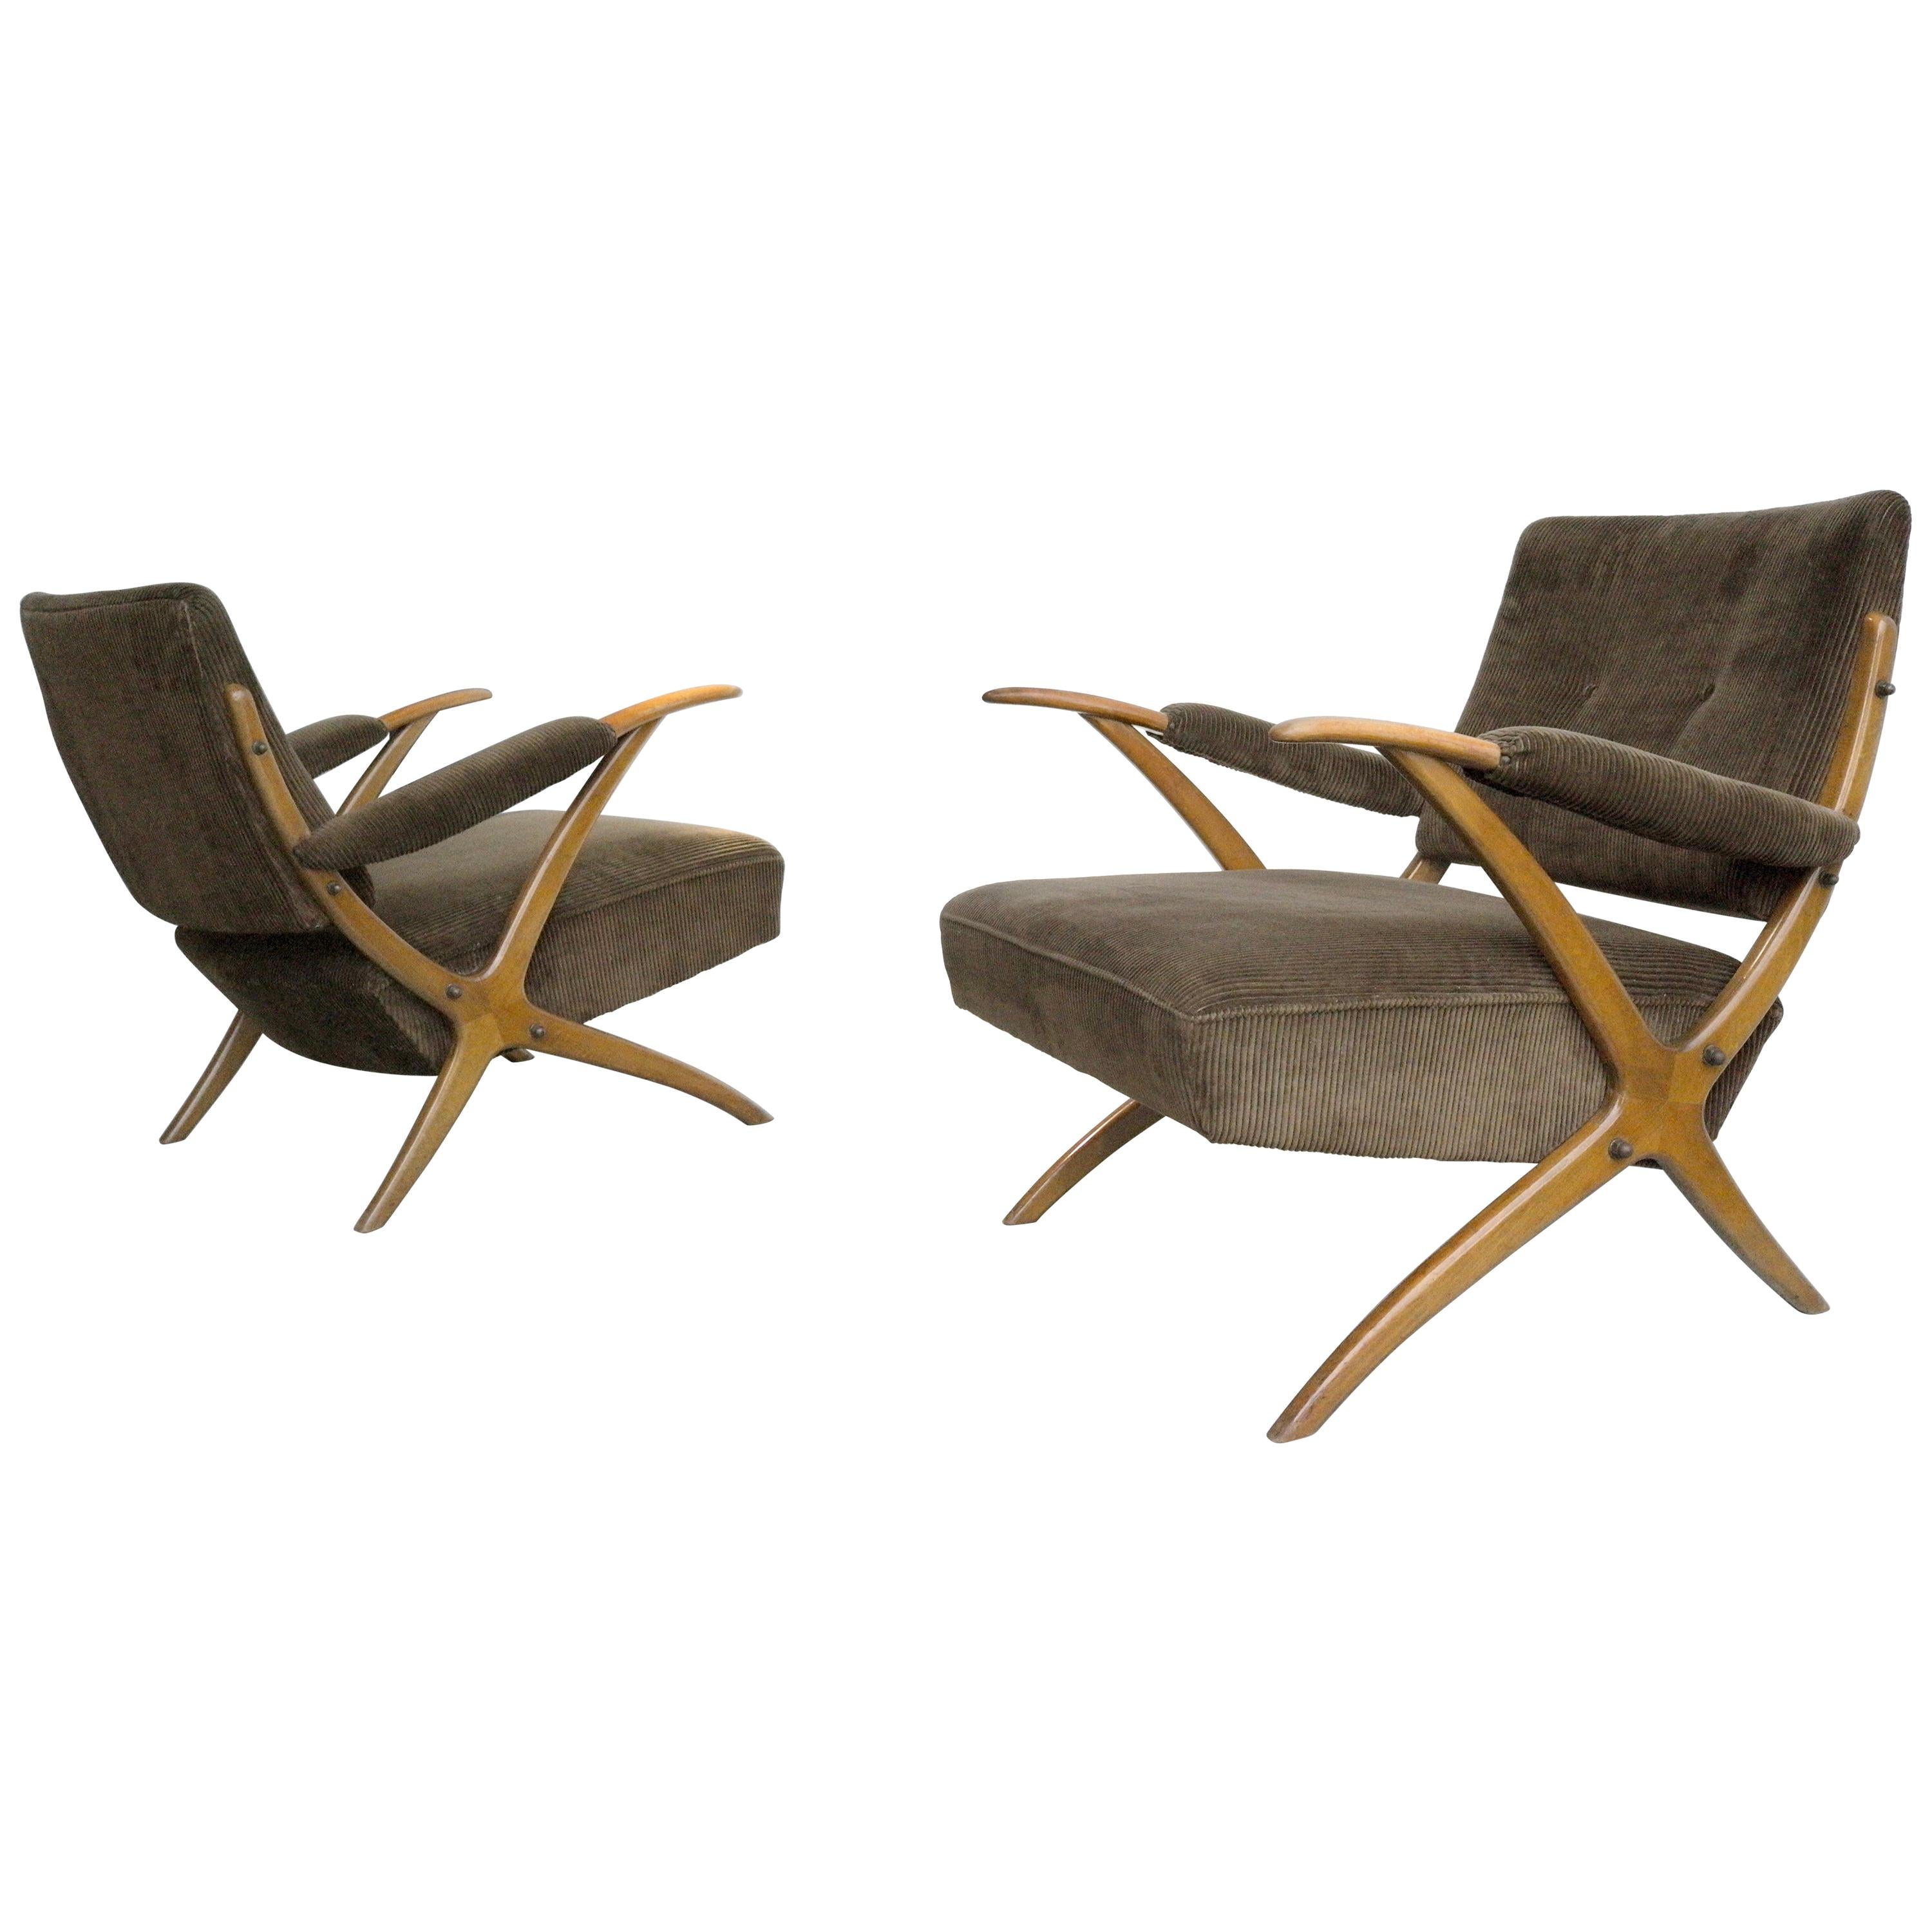 Exceptional Pair of Wooden Curved Cross-Frame Lounge Chairs, Italy, 1950s